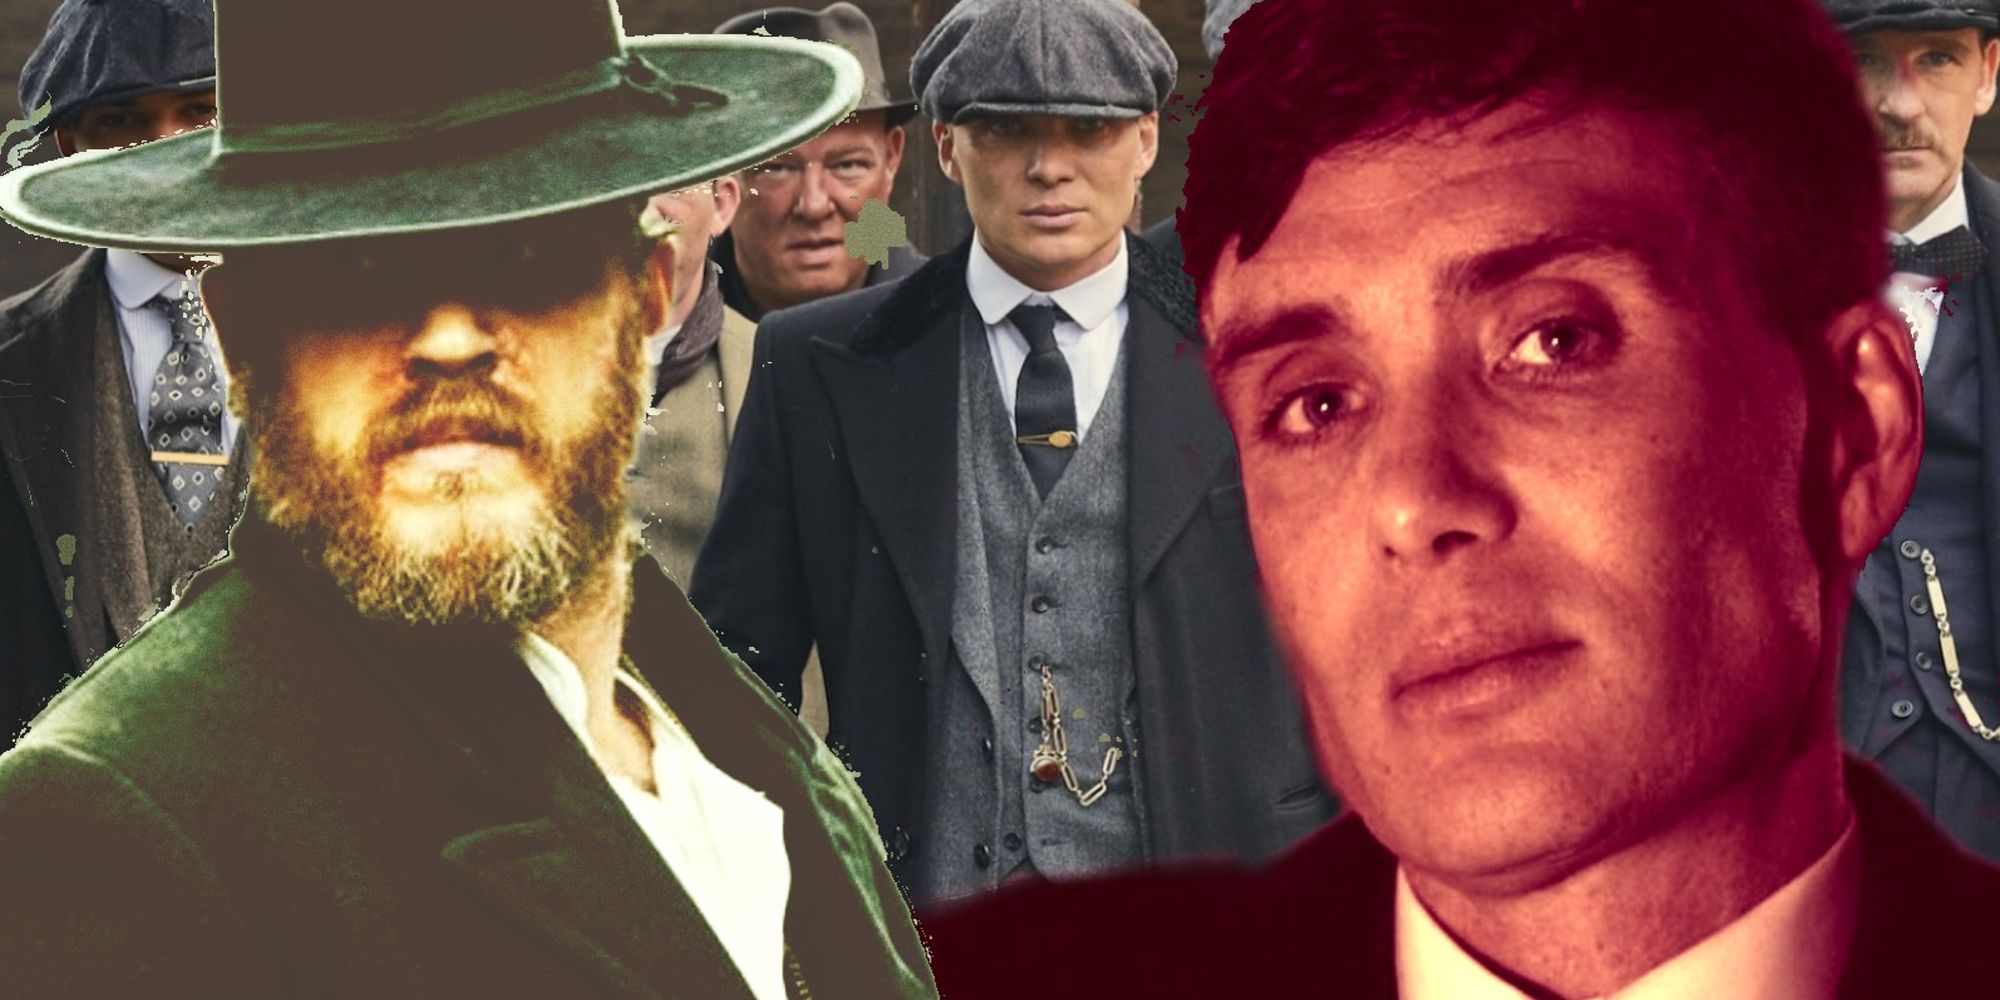 A collage featuring the peaky blinders behind images of Alfie Solomons (Tom Hardy) and Tommy Shelby (Cillian Murphy) from Peaky Blinders